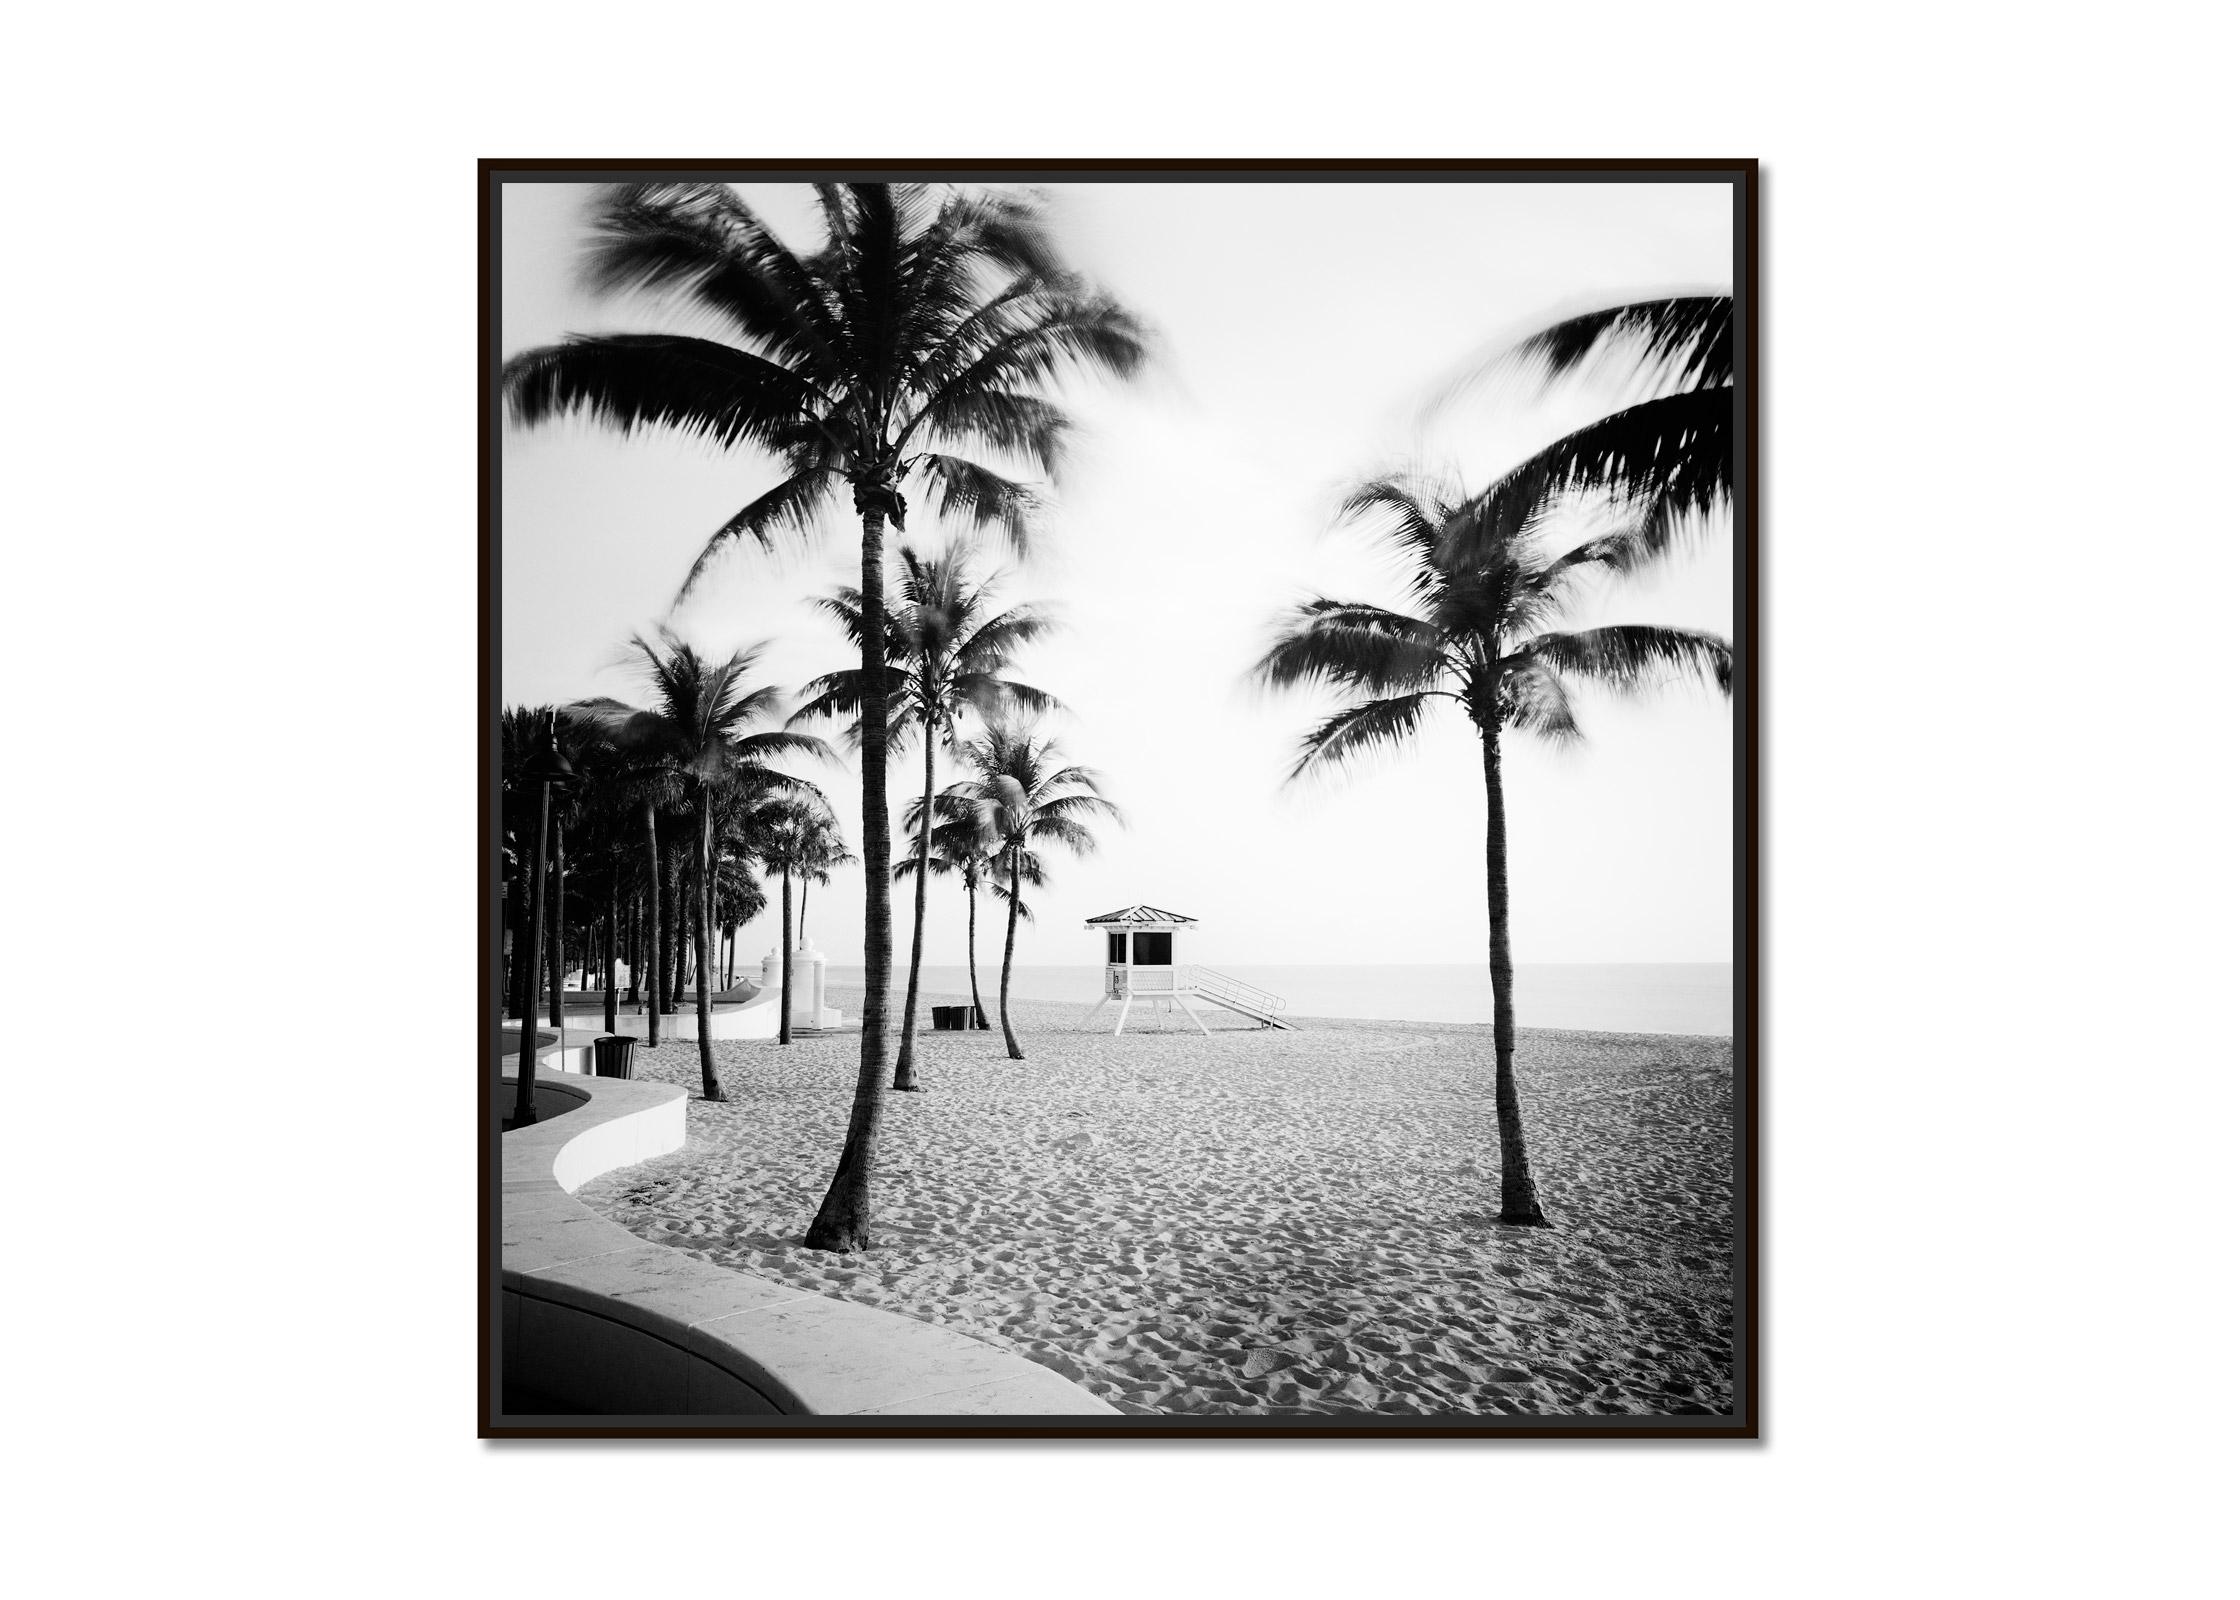 Fort Lauderdale Beach Palm Trees Florida black and white landscape photography - Photograph by Gerald Berghammer